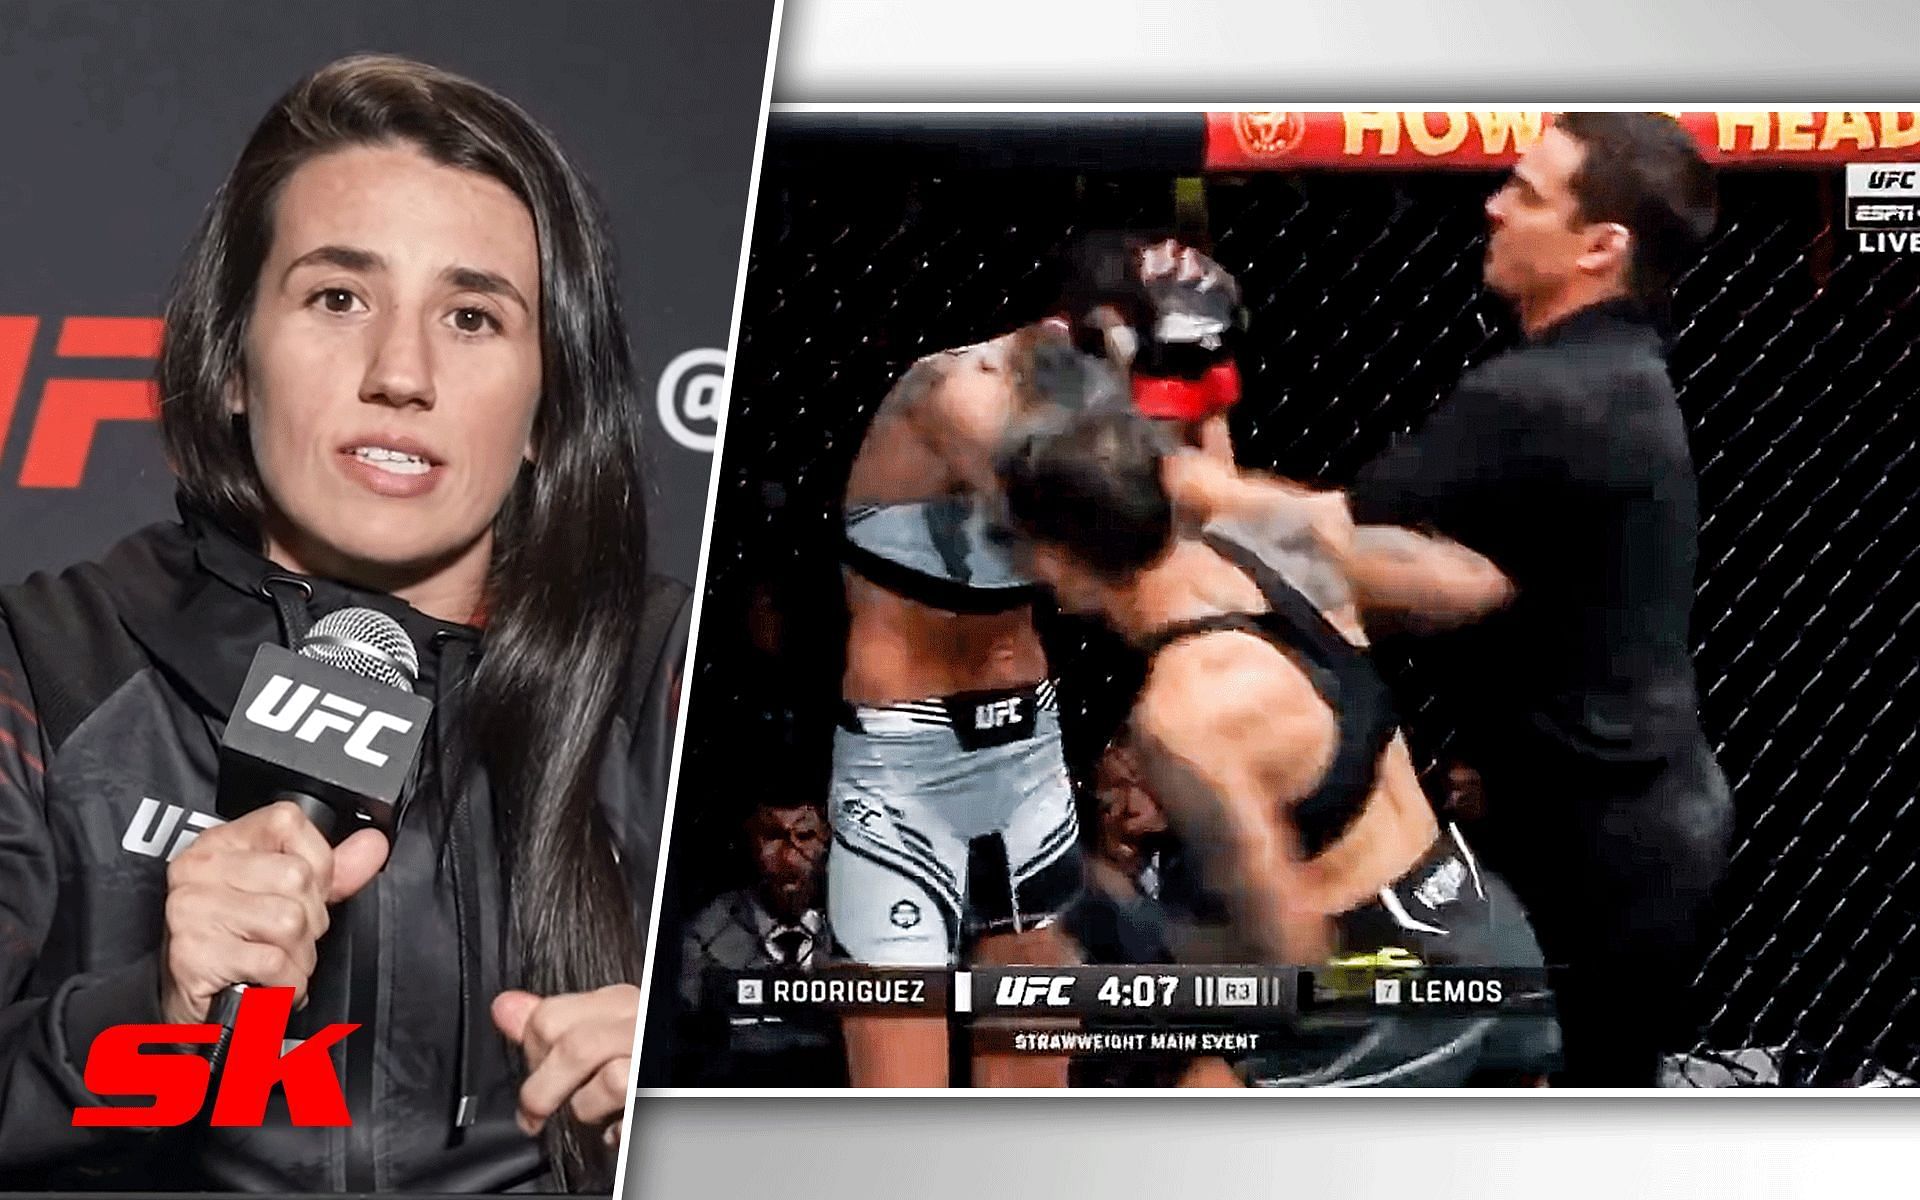  Marina Rodriguez blames early stoppage for UFC Fight Night loss against Amanda Lemos [Images via: MMA Junkie | YouTube, @SpinninBackfist on Twitter]